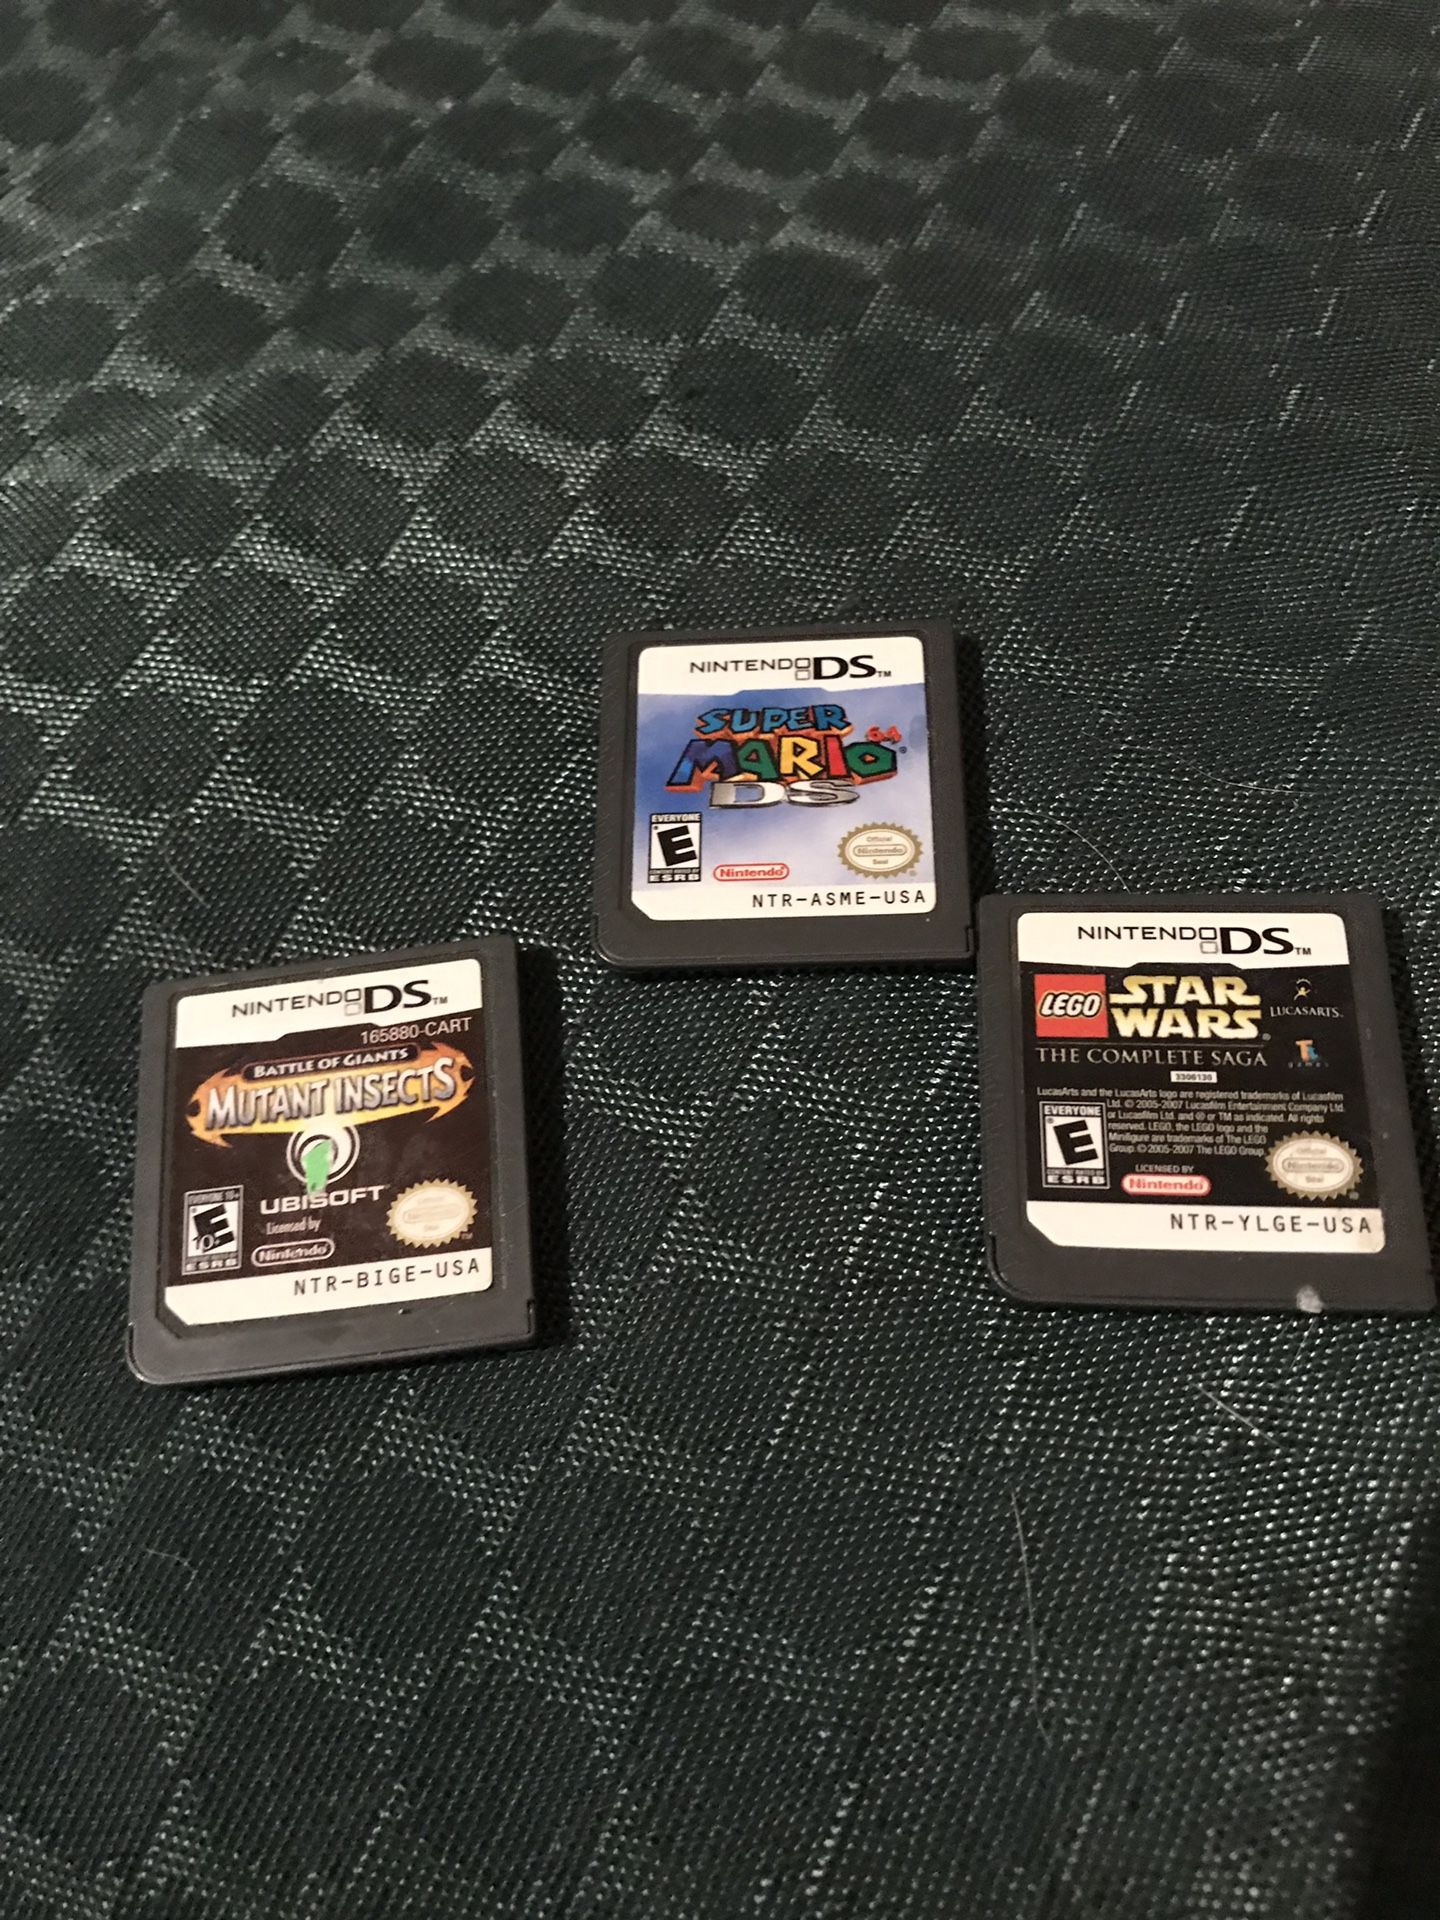 3 Nintendo ds games Mario, lego Star Wars and battle of giants